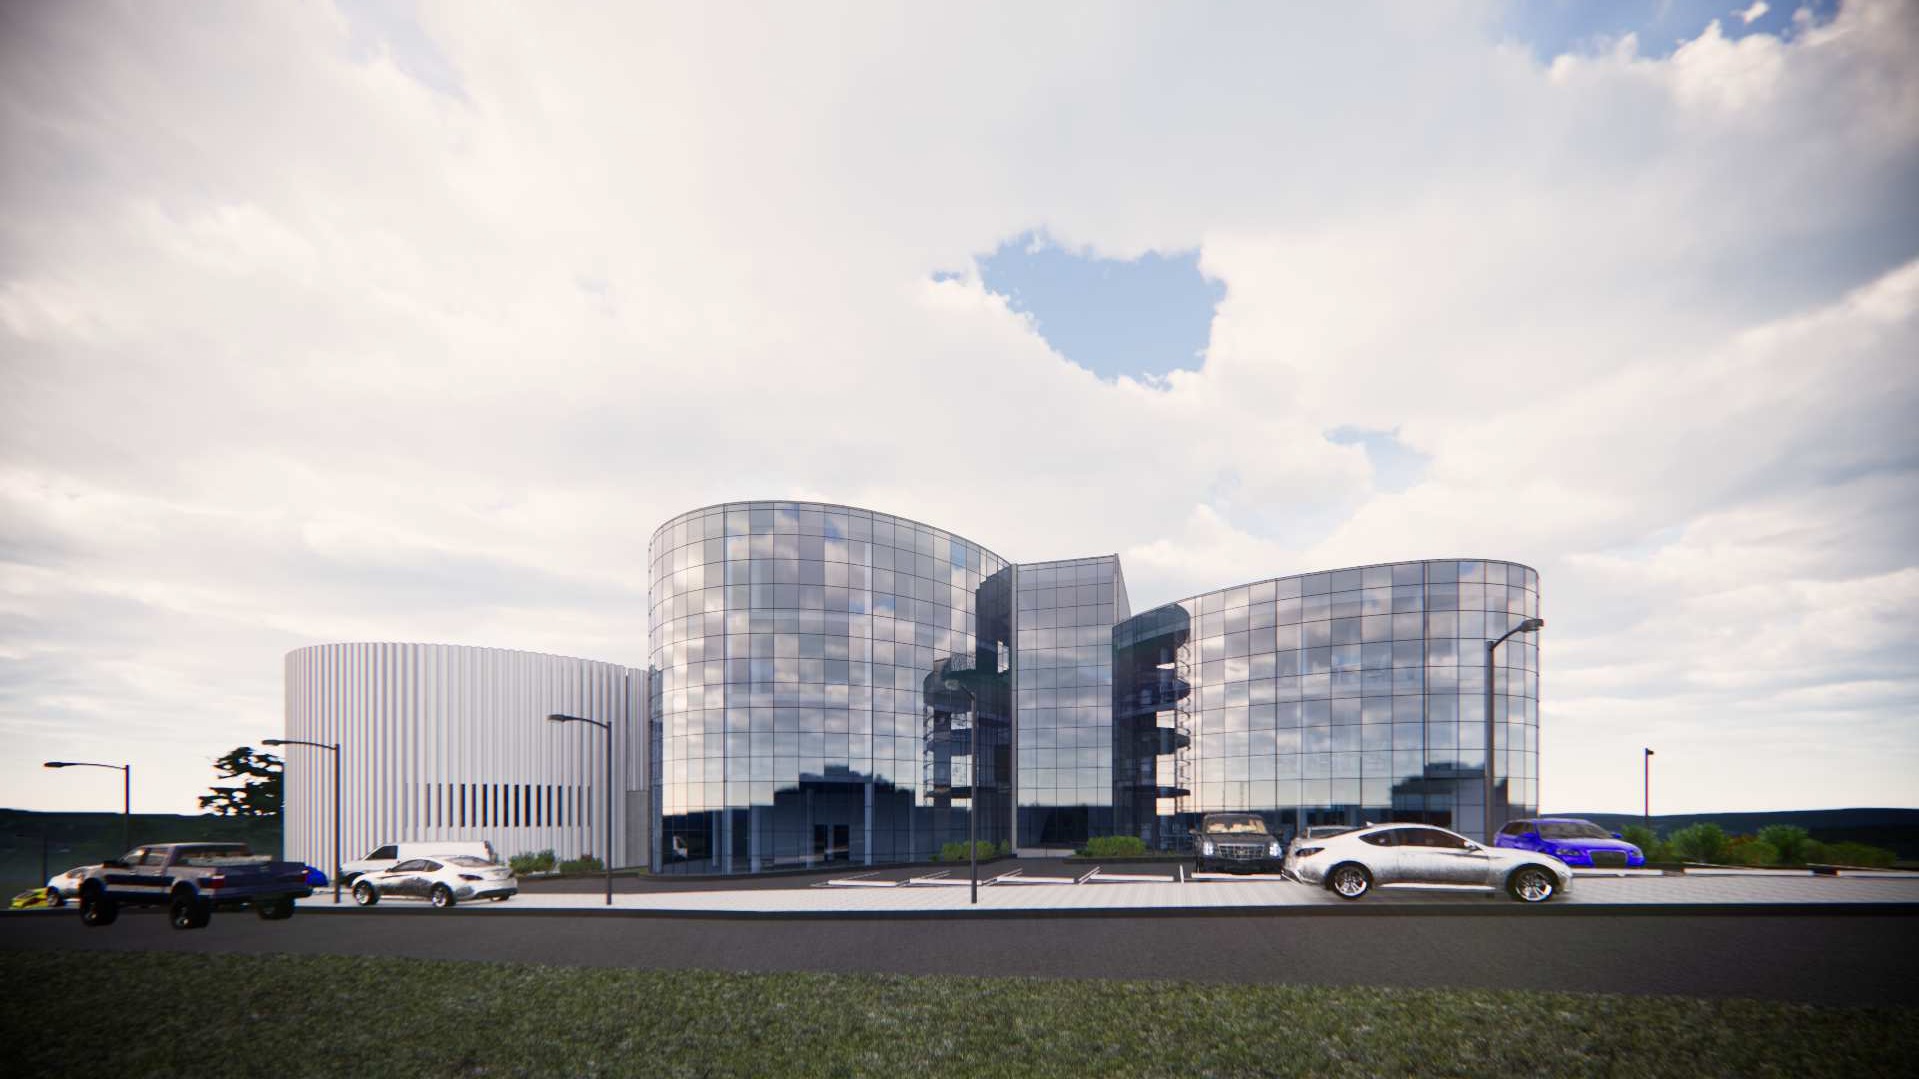 The visual representation of the Gene Therapy Centre, scheduled for completion in 2024